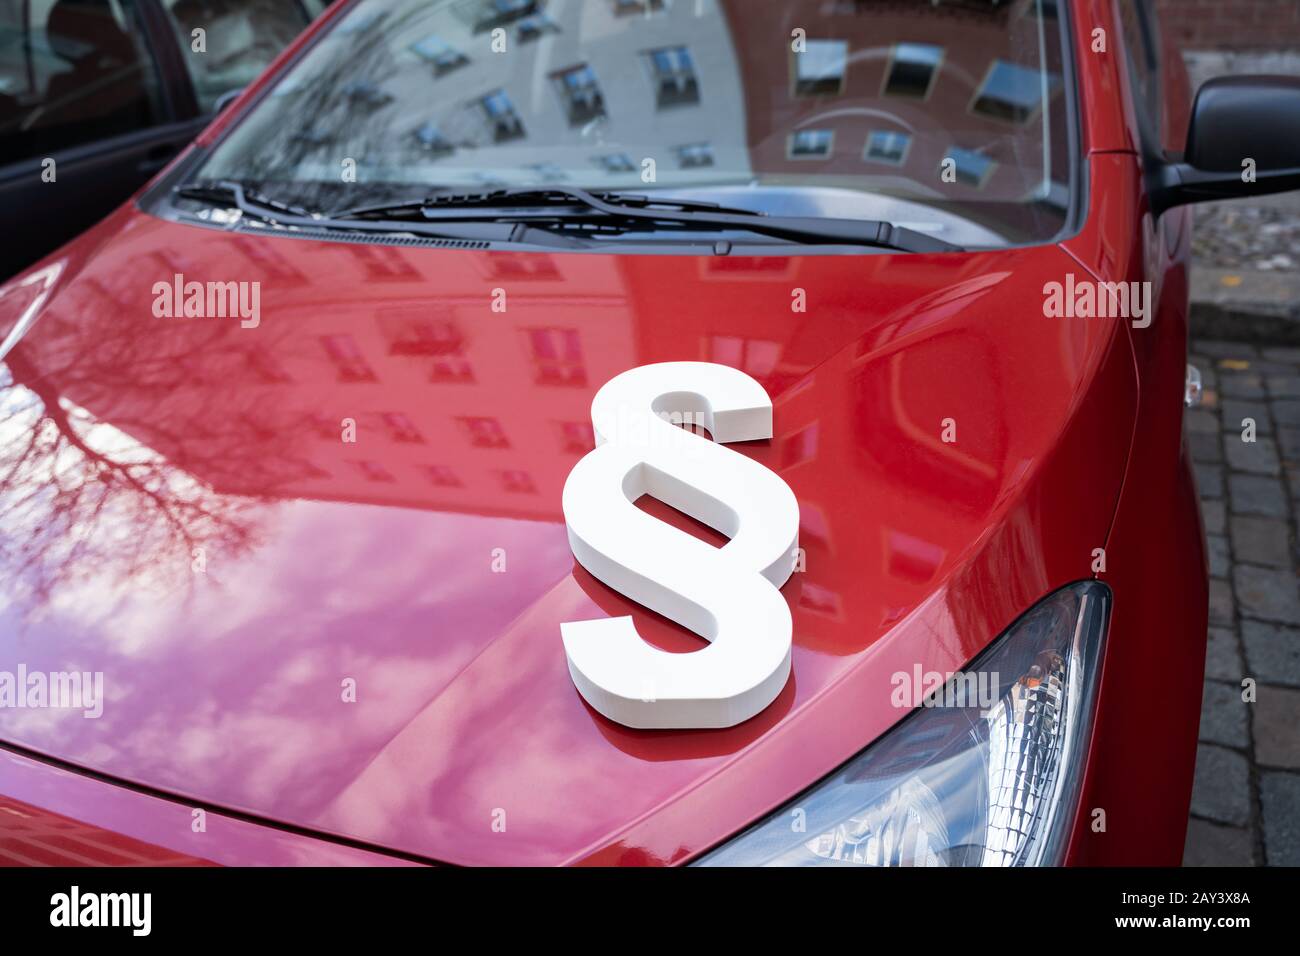 Paragraph Lap Symbol On Car Hood Cover Stock Photo